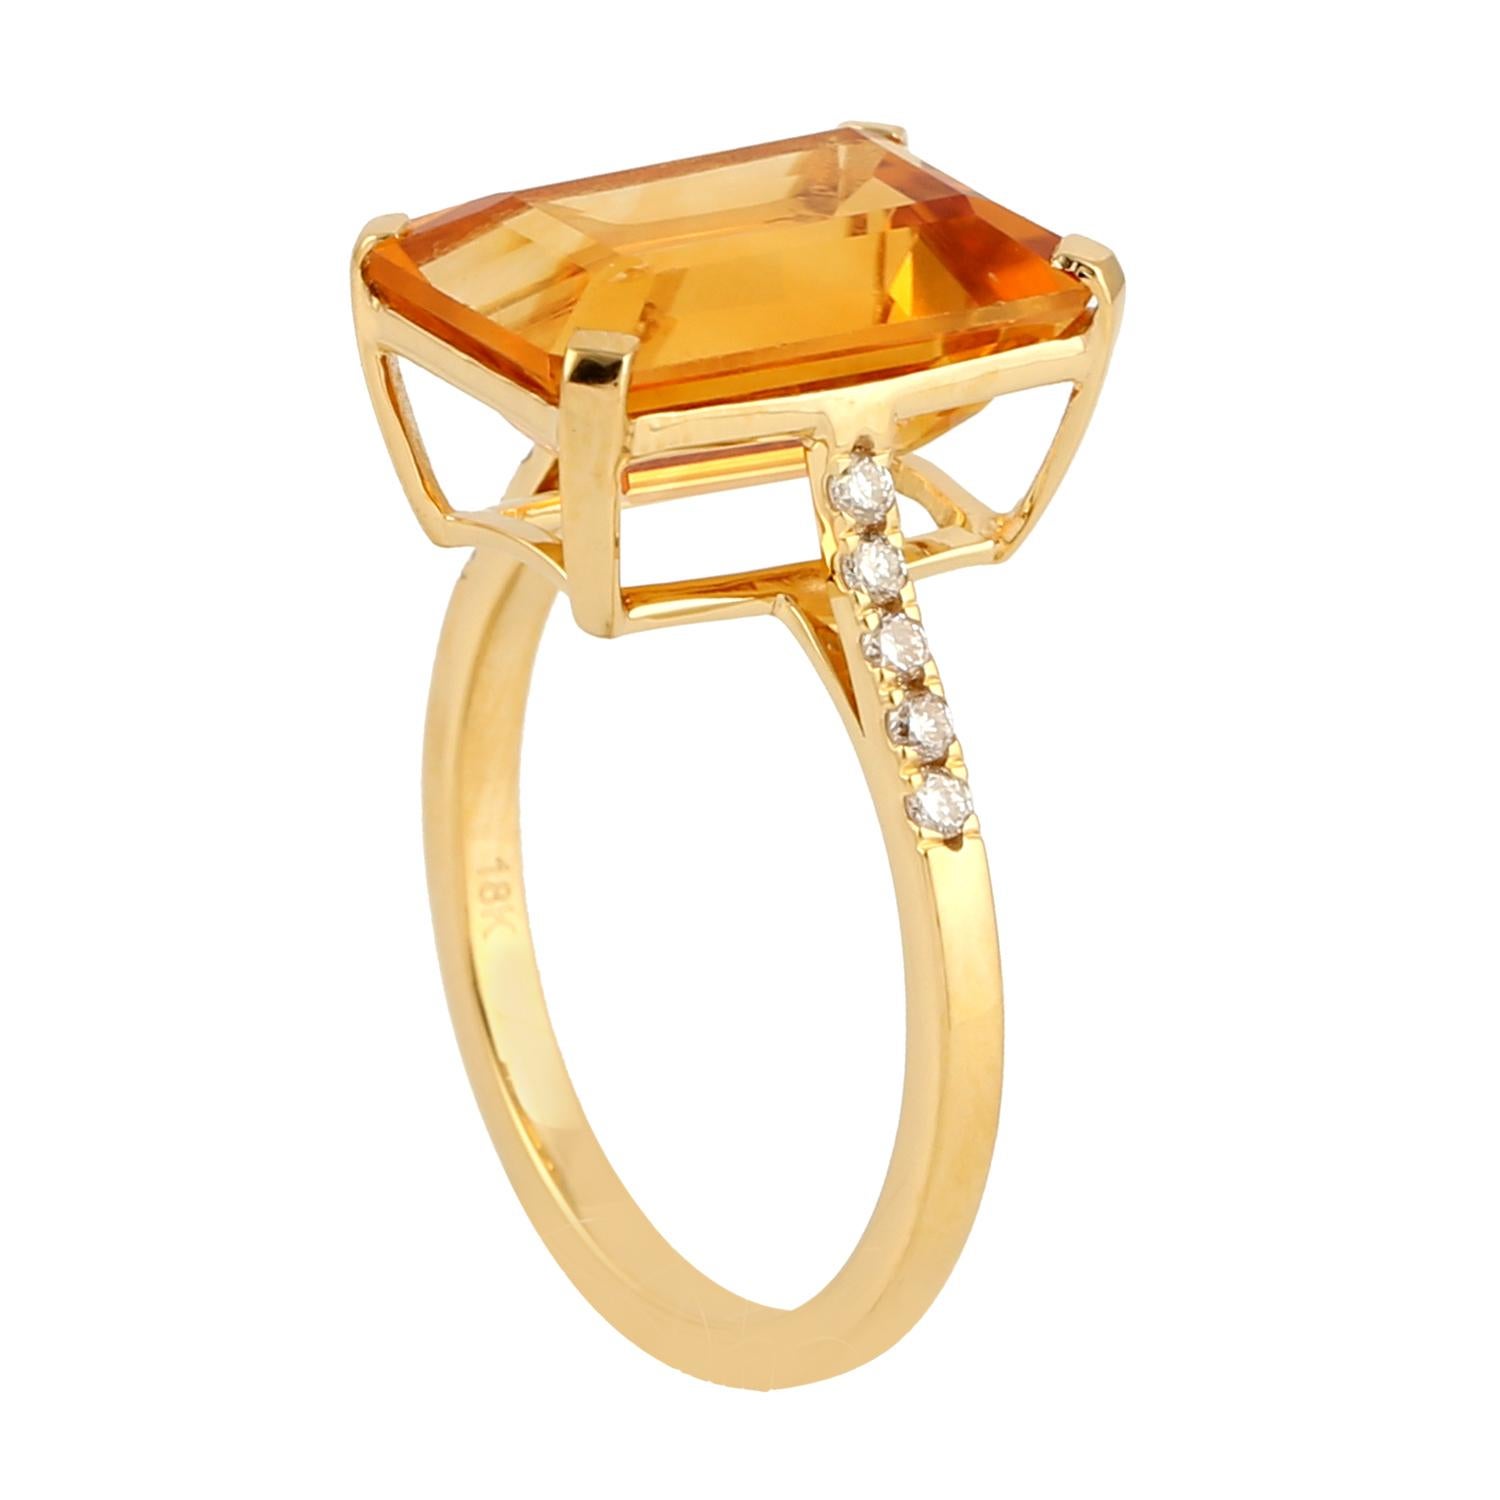 Emerald Cut Citrine Cocktail Ring with Pave Diamond in 18k Yellow Gold In New Condition For Sale In New York, NY